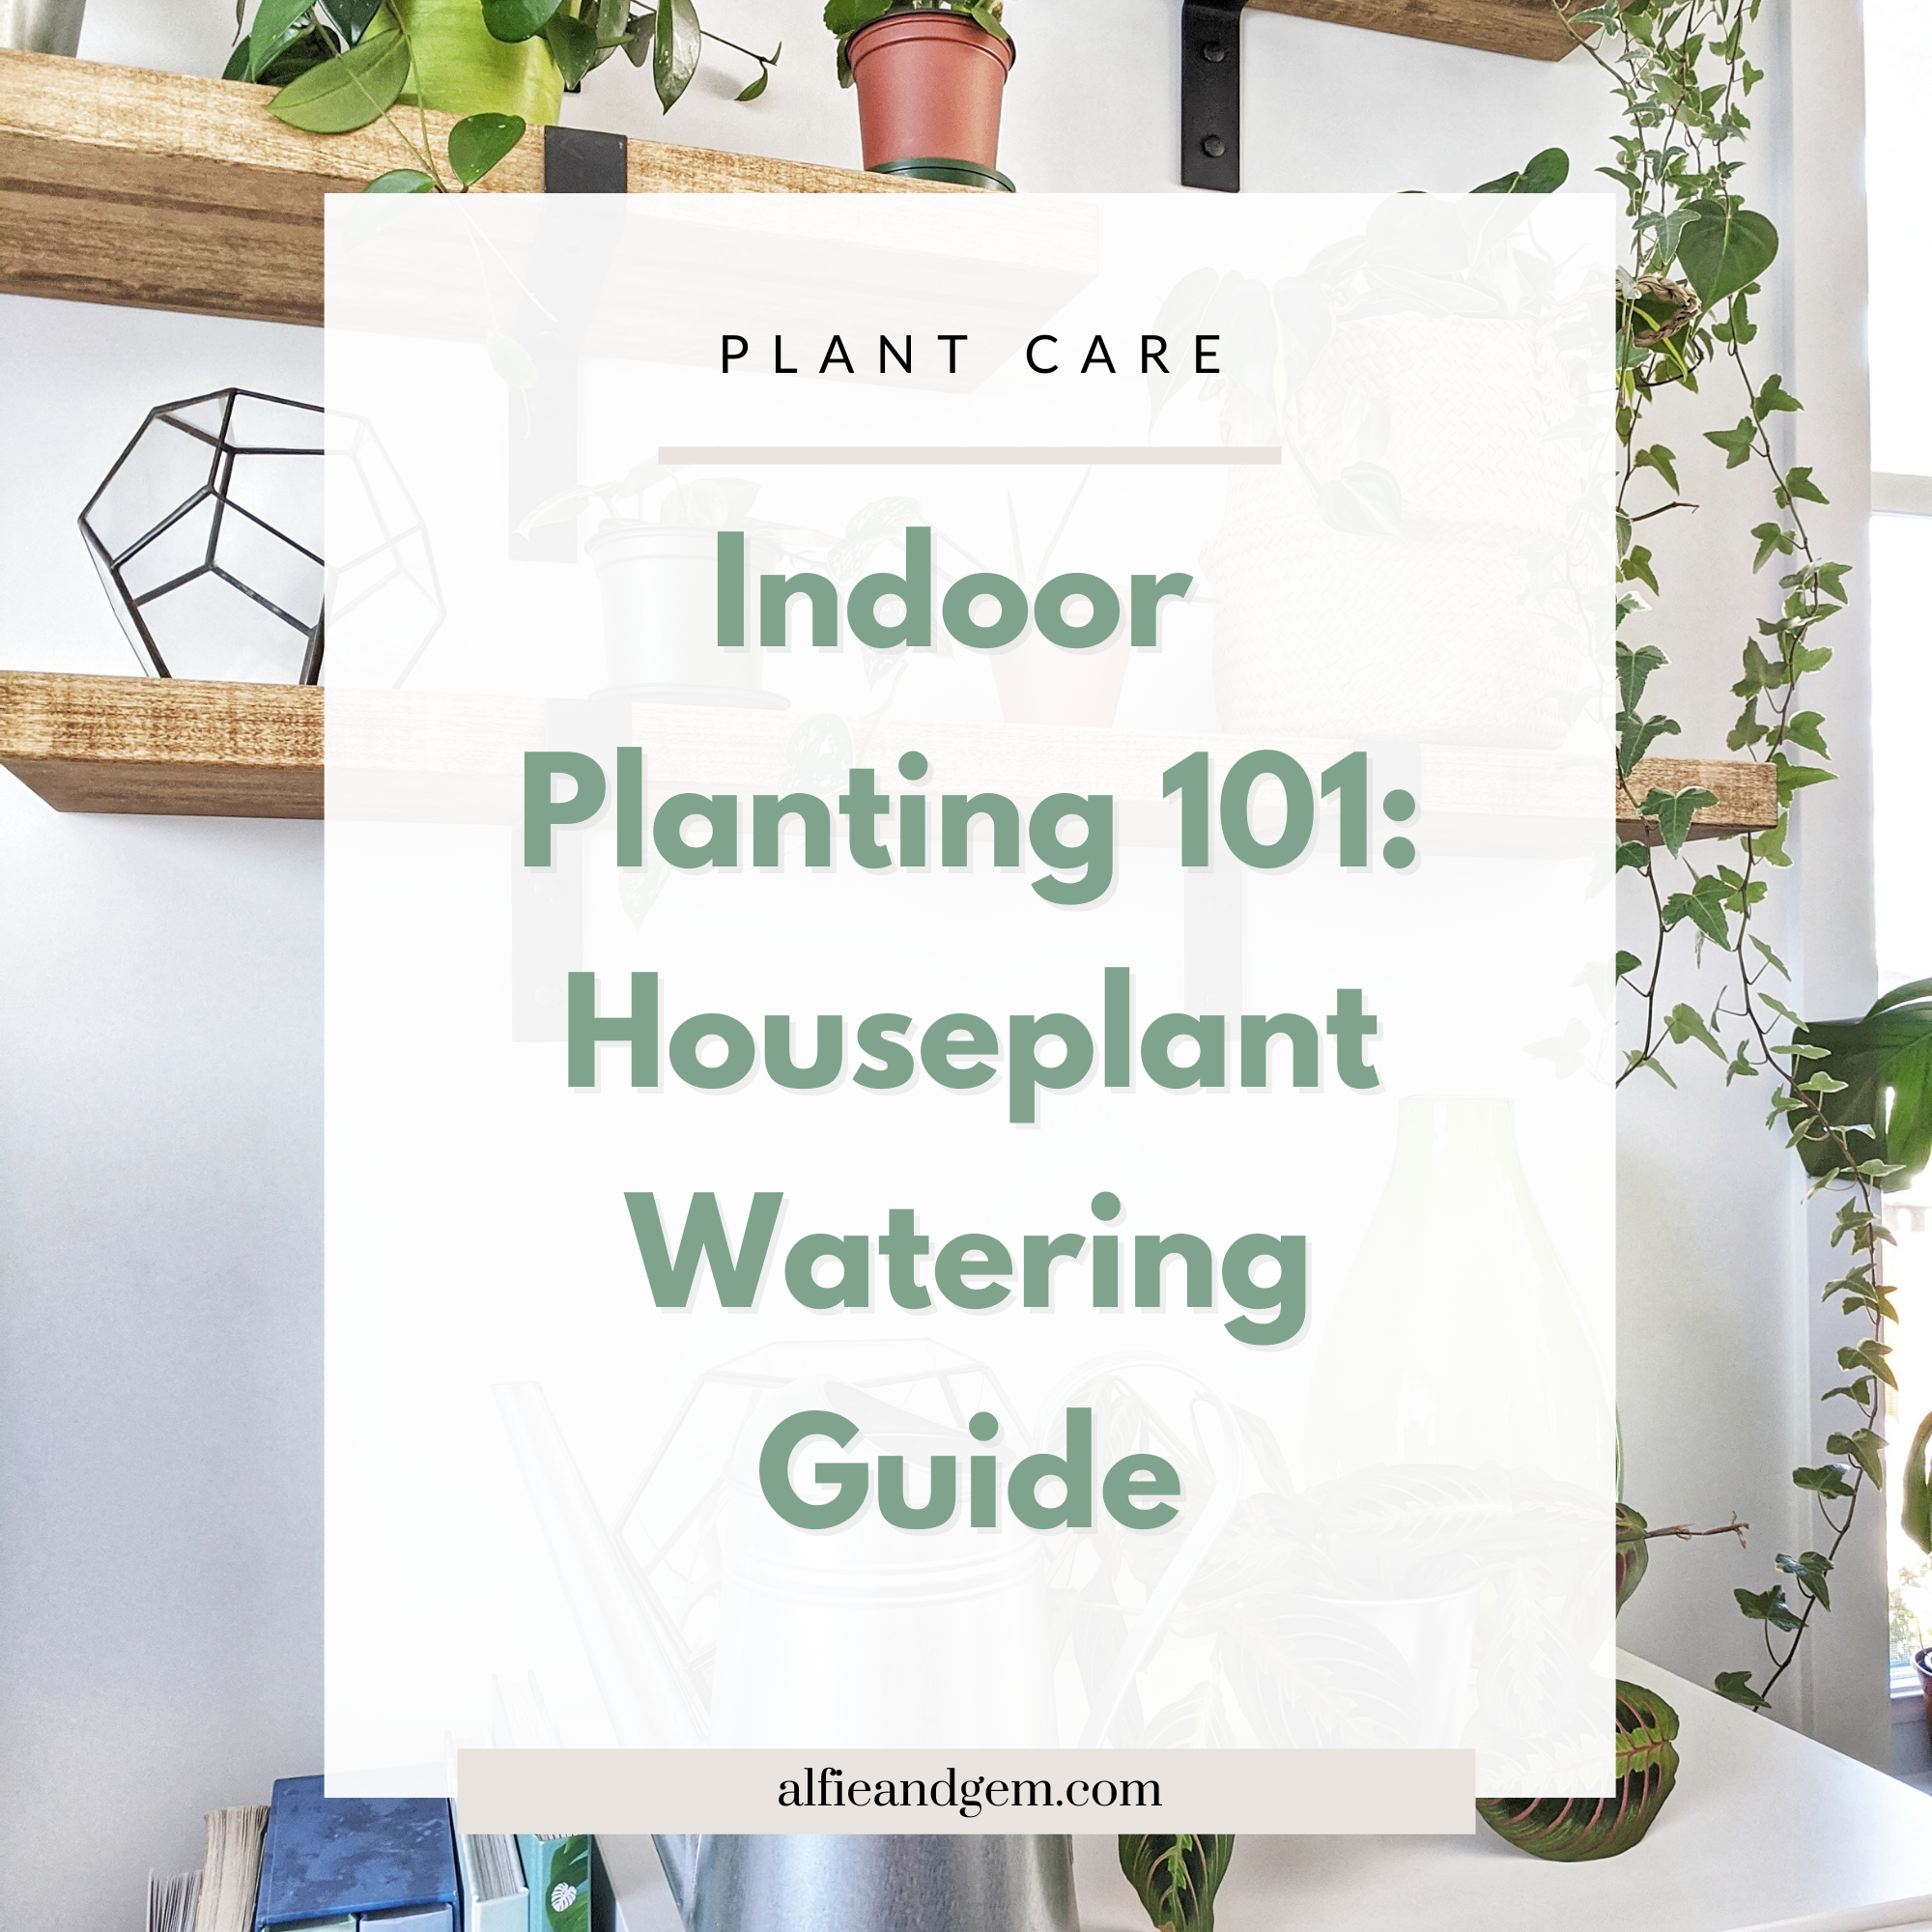 Indoor Planting Guide: How to Water Your Plants The Right Way